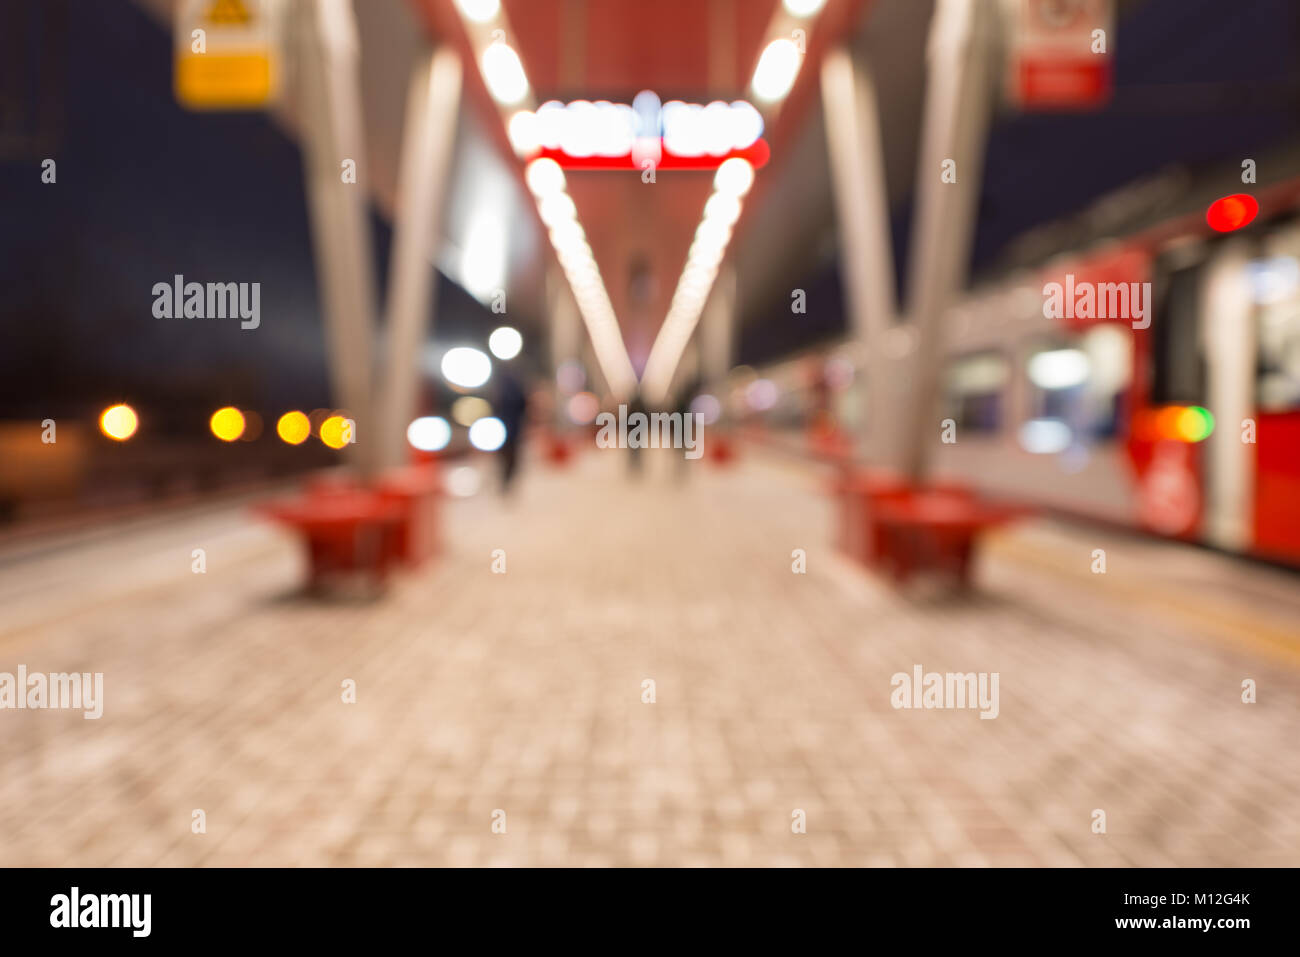 Blurred image of the highspeed trains by the station platform at evening time. Stock Photo